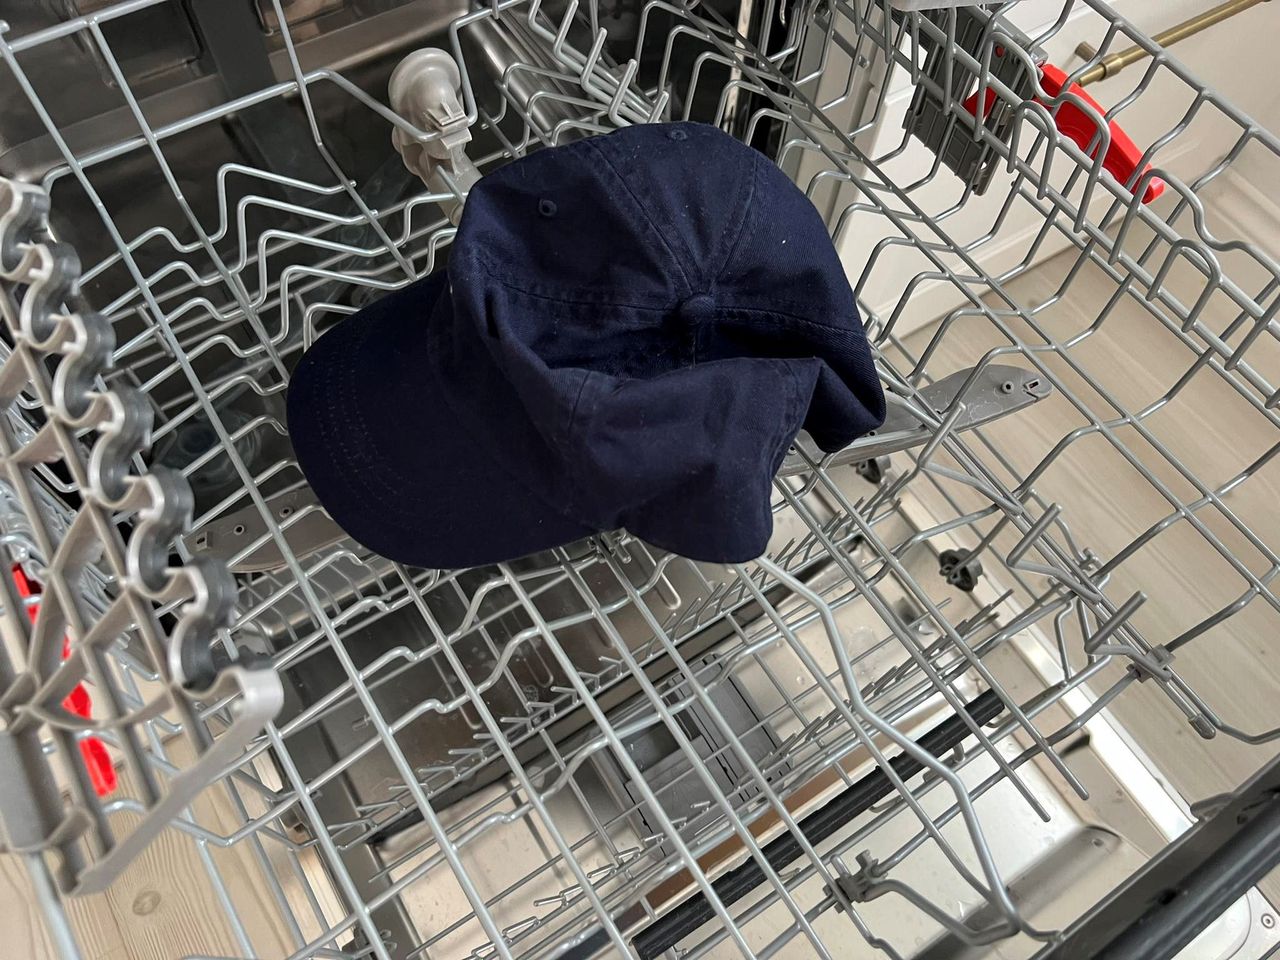 Put the cap in the dishwasher. Simple trick takes over the net